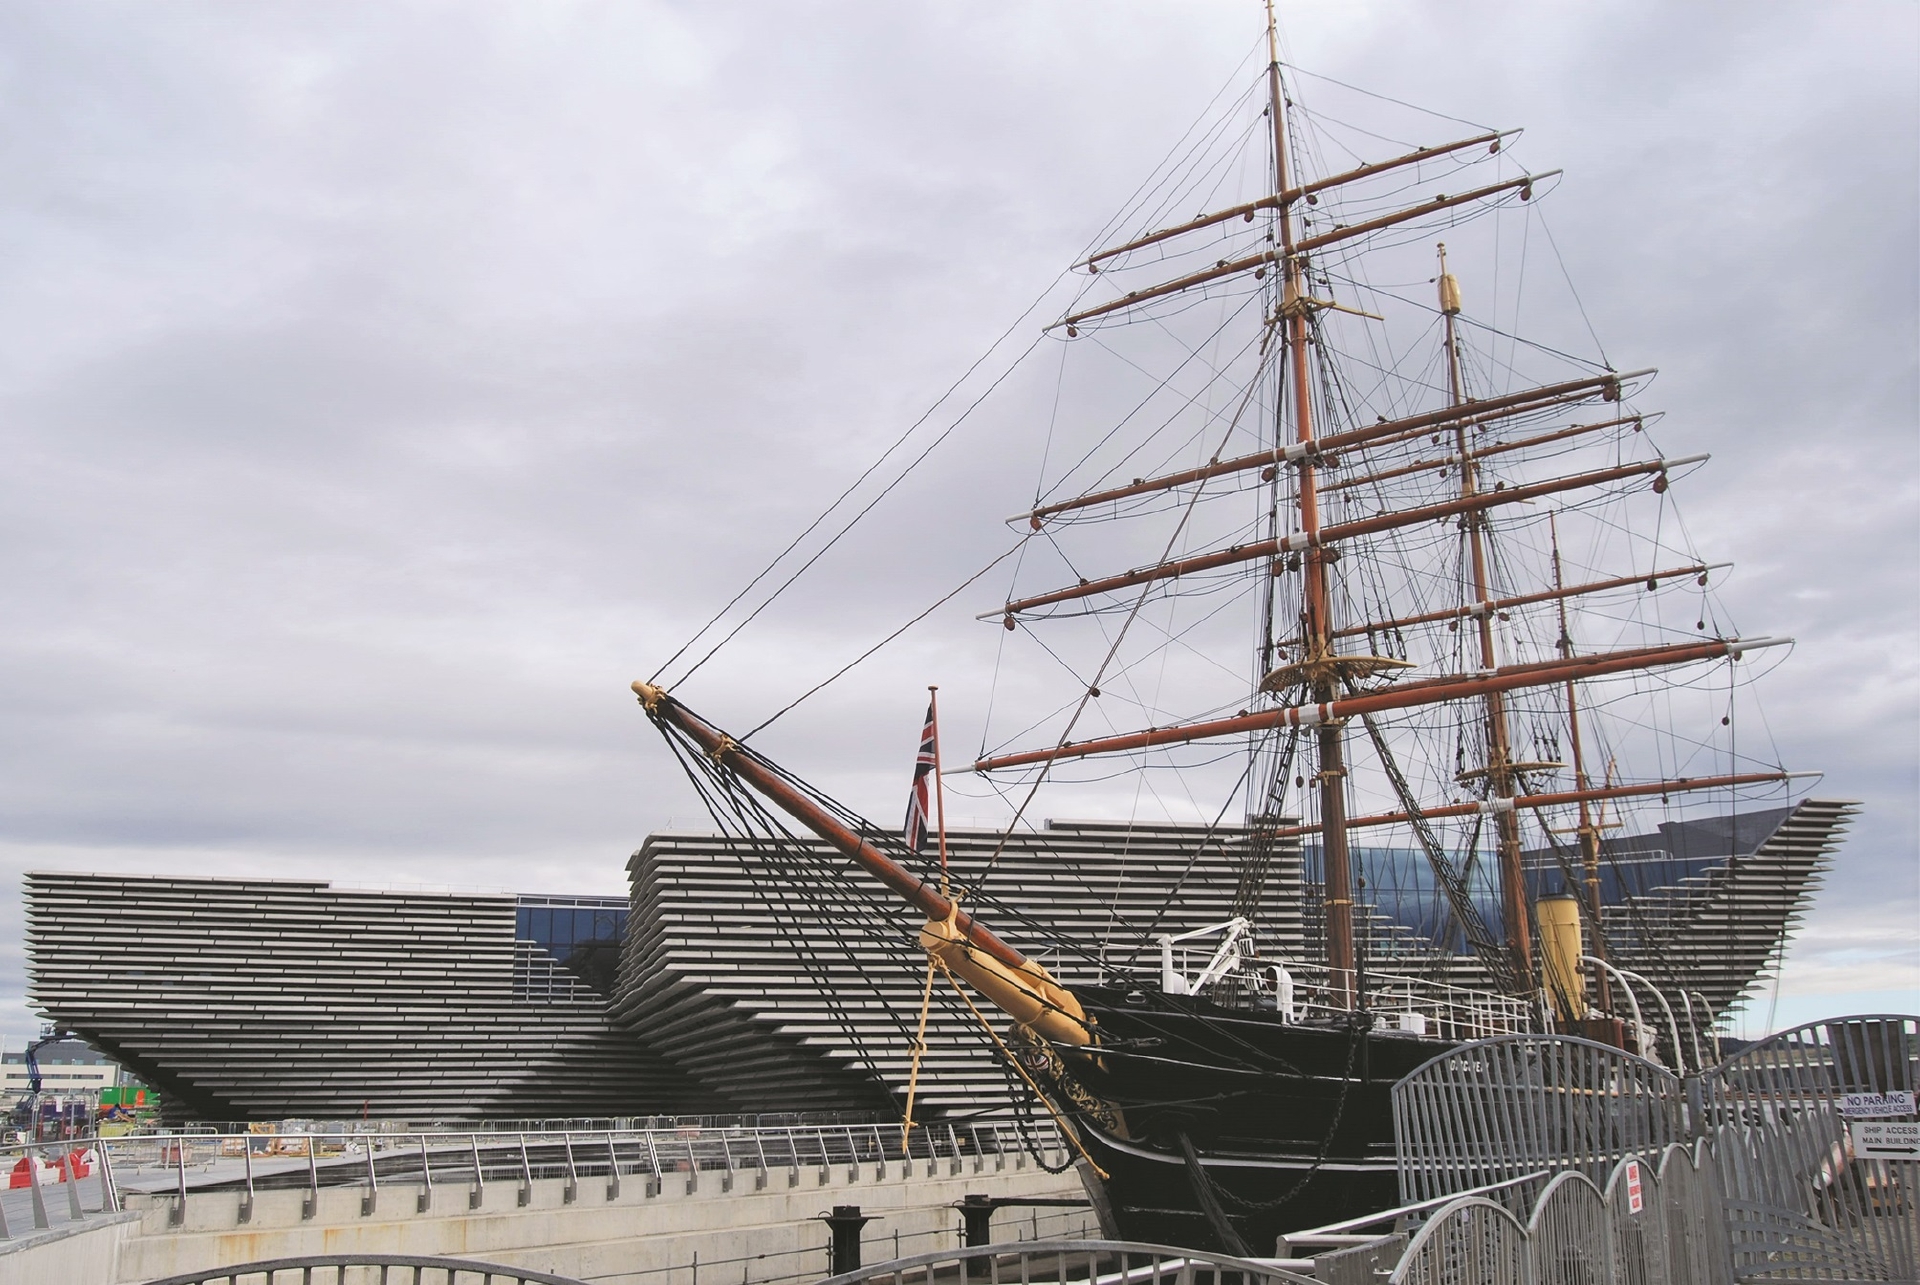 RRS Discovery and the V&A are among Dundee's many attractions.